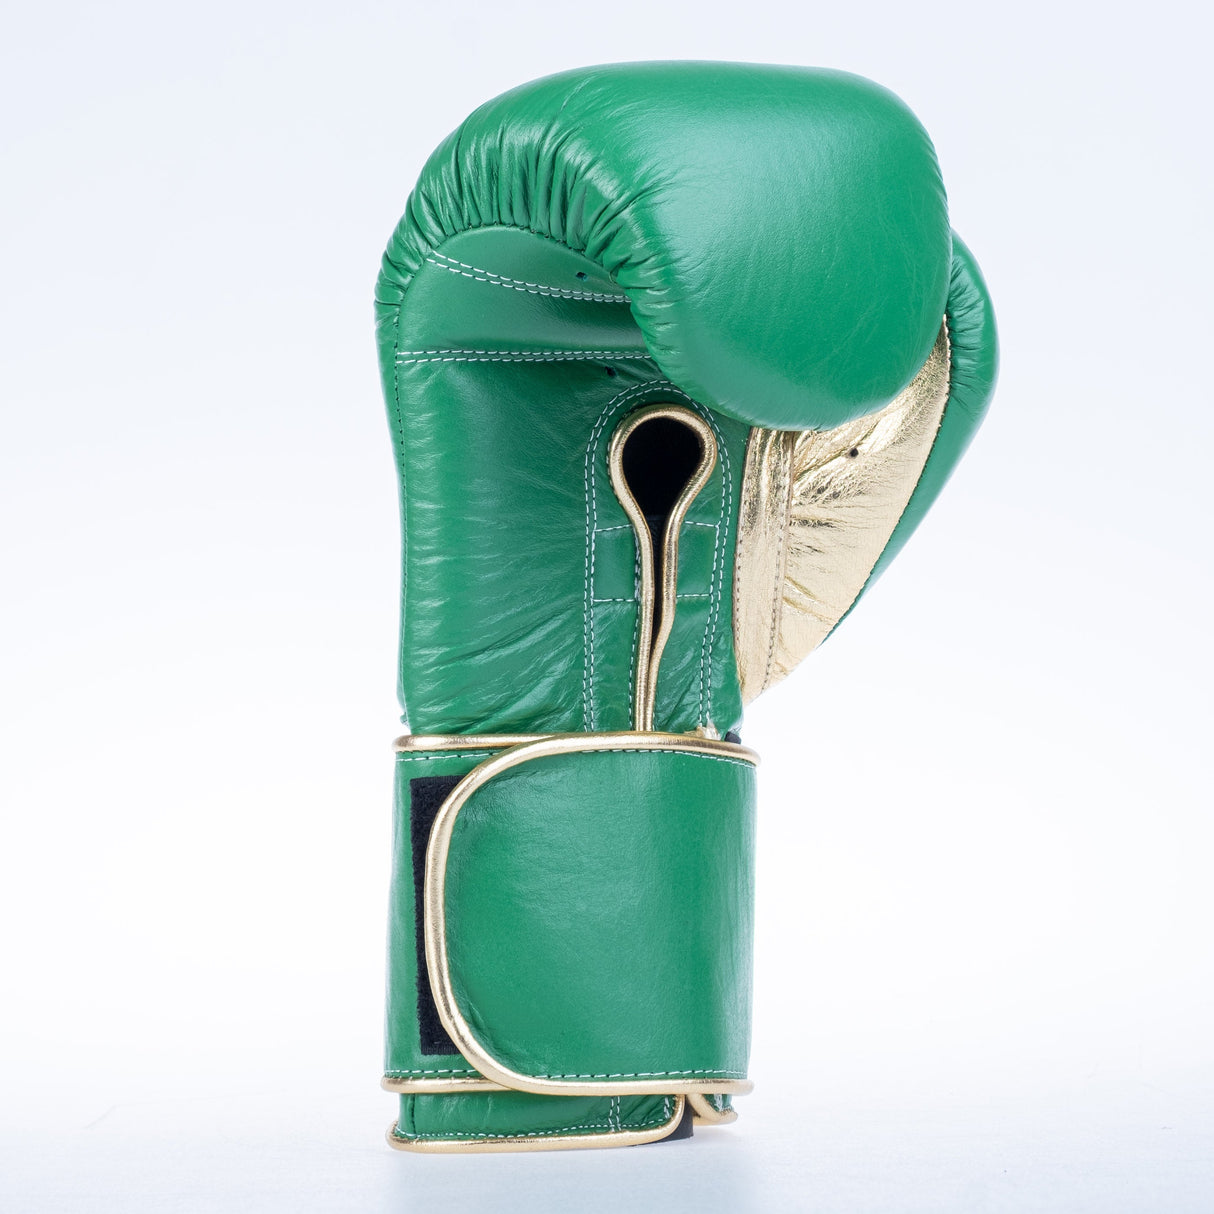 Paffen Sport PRO WIDE Boxing Gloves - green/gold, 2118050